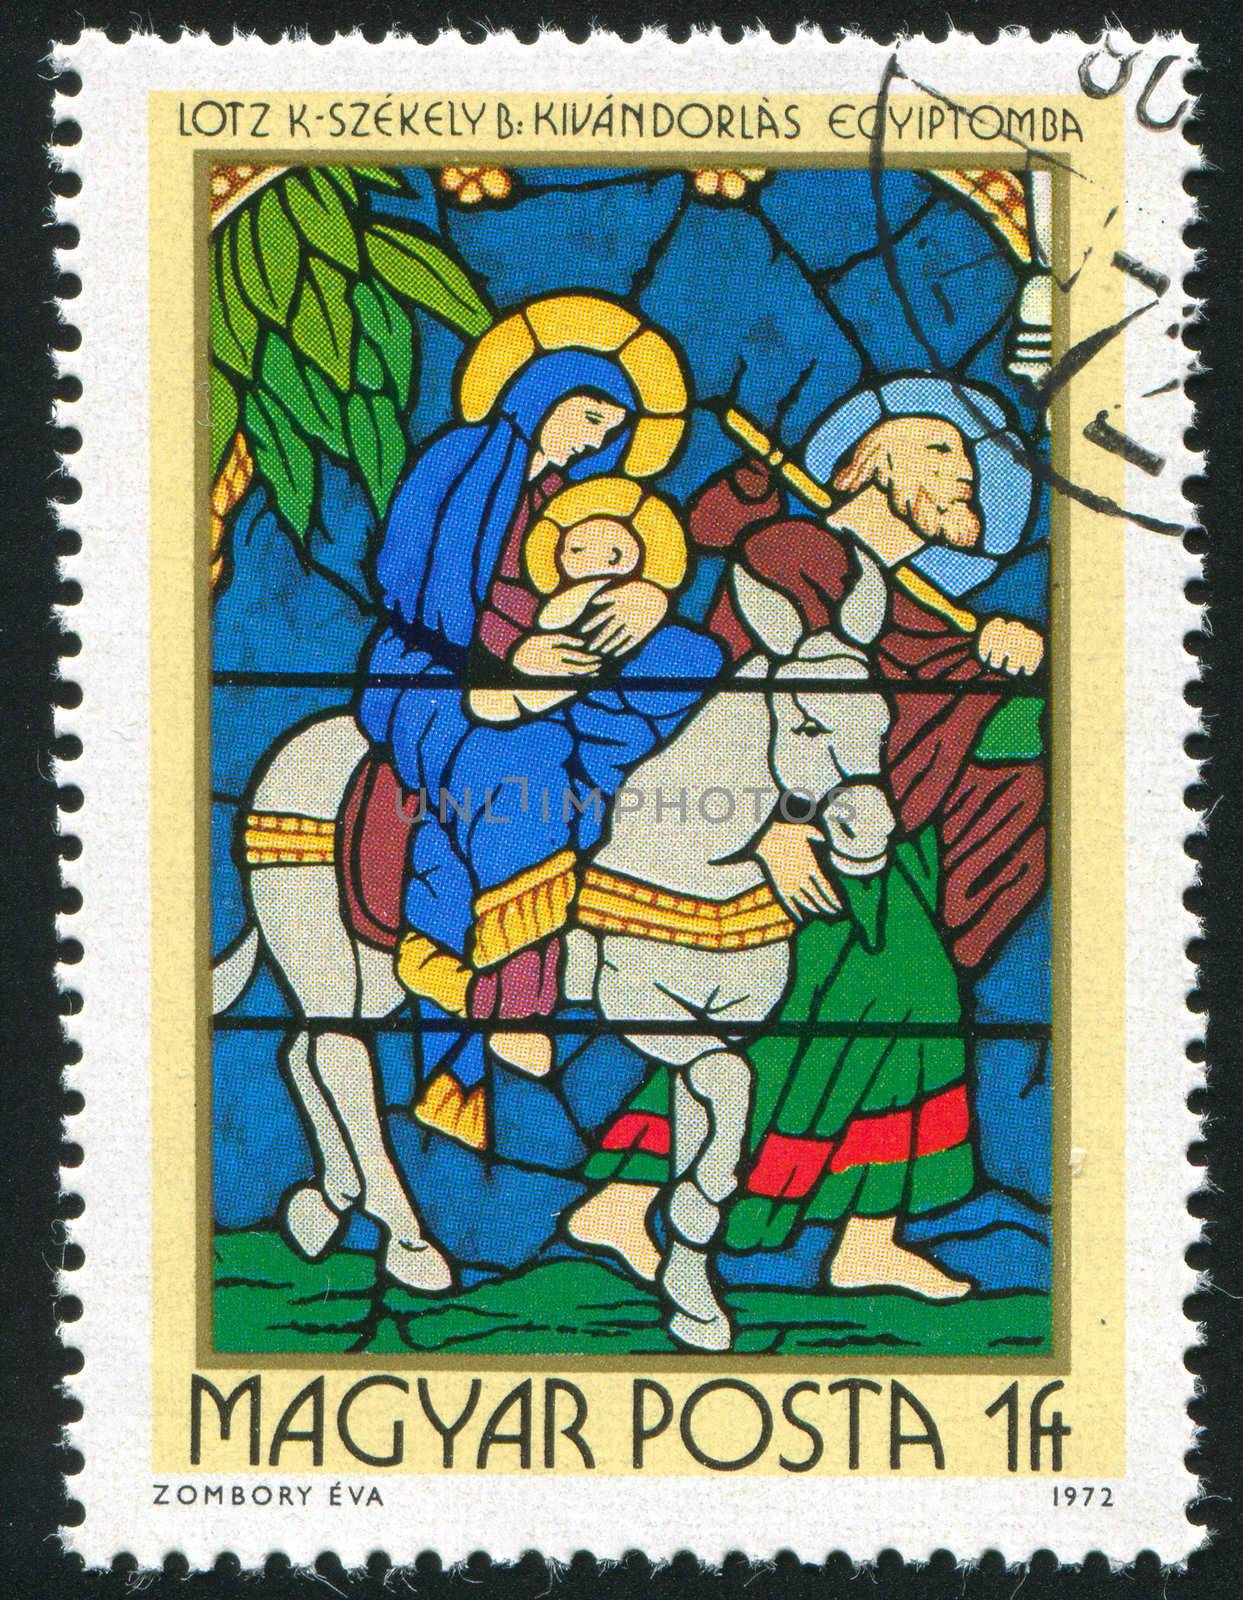 Flight into Egypt by rook